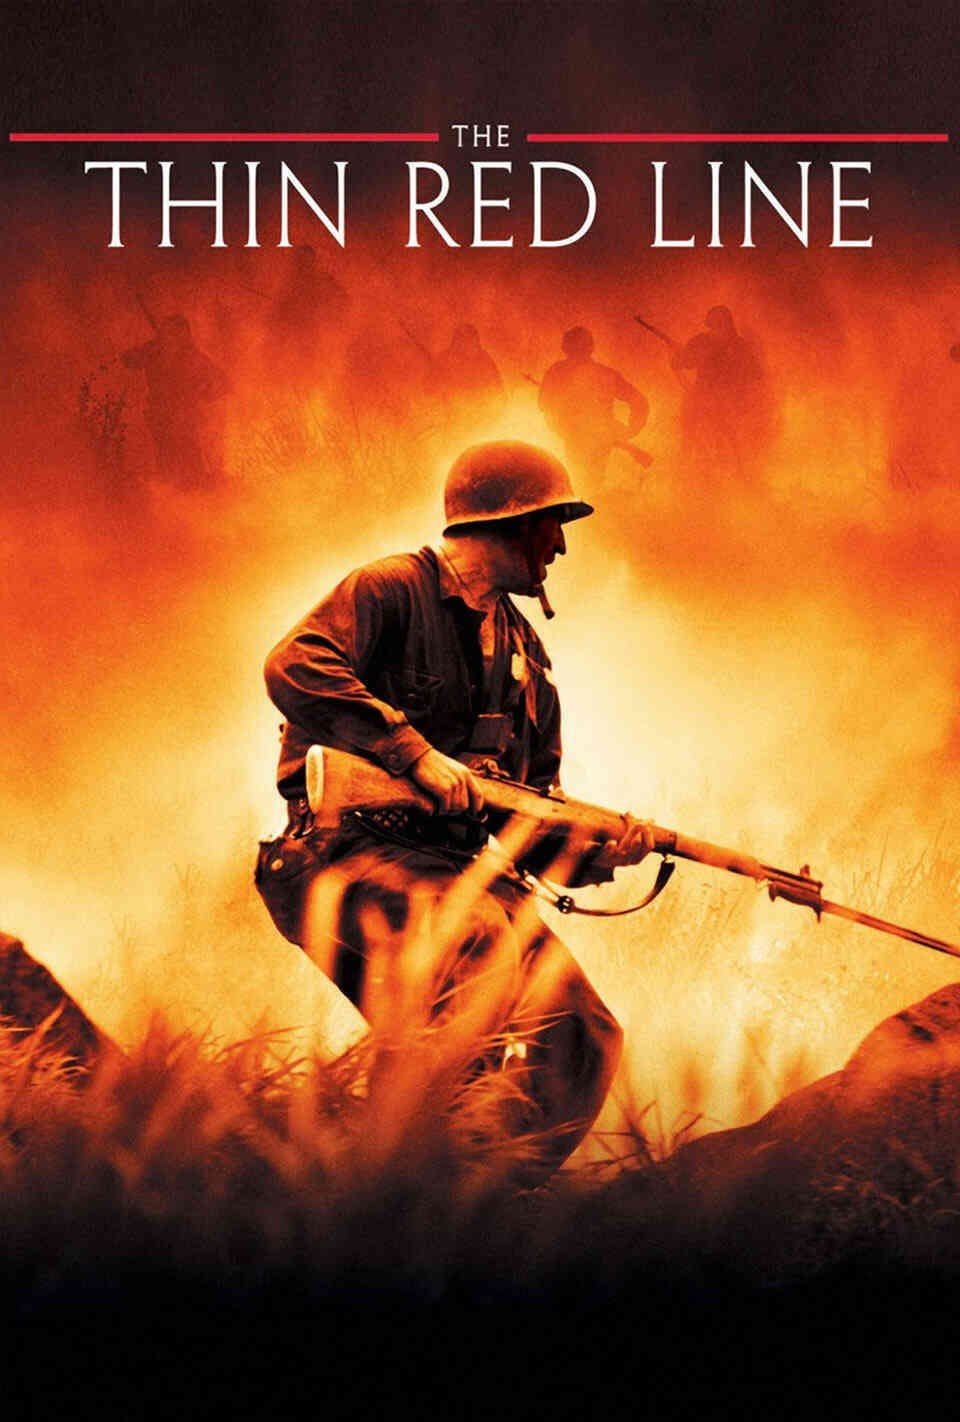 Read The Thin Red Line screenplay.